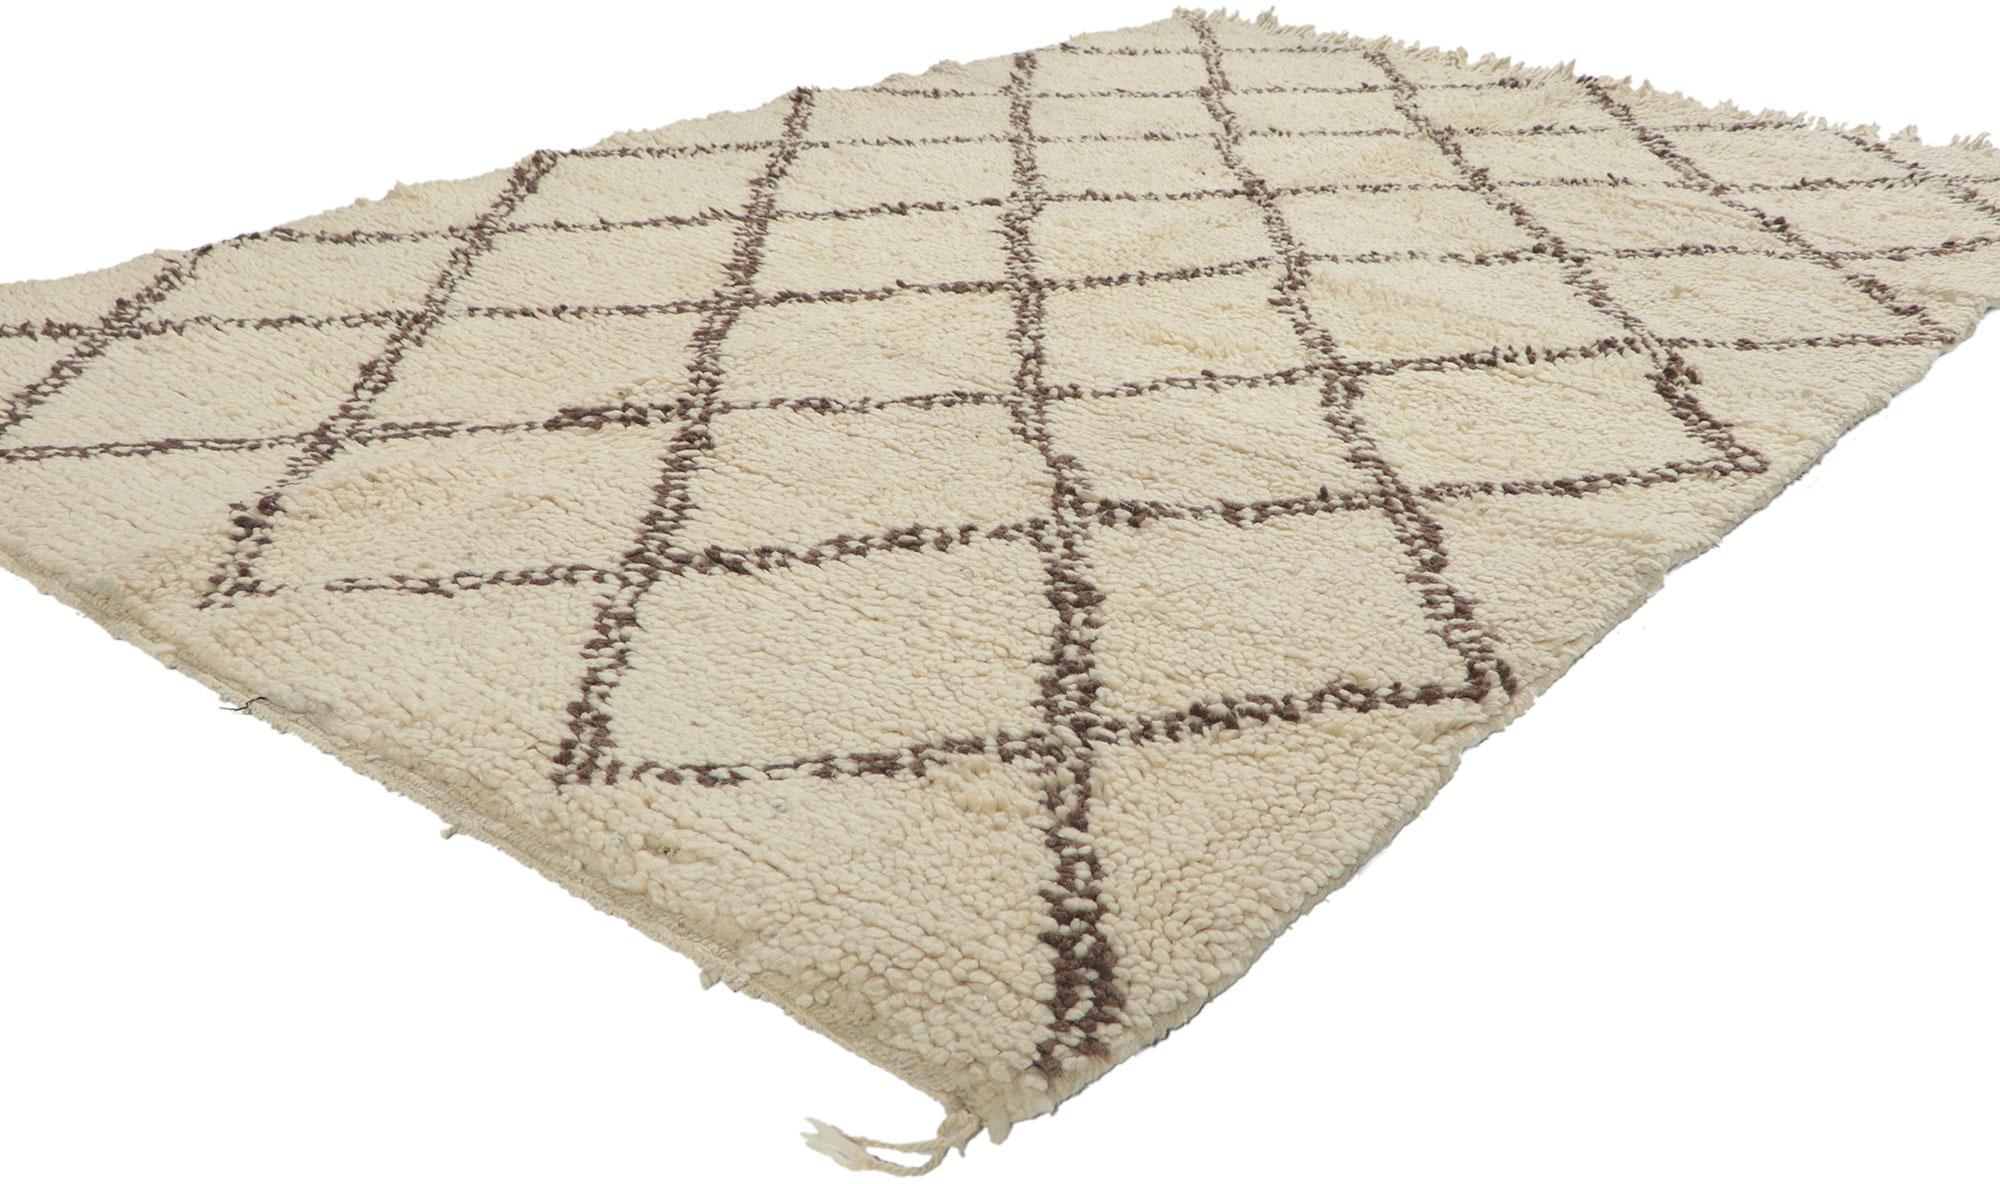 78400 Vintage Moroccan Beni Ourain rug, 04'07 x 06'09. With its simplicity, plush pile, incredible detail and texture, this hand knotted wool vintage Beni Ourain Moroccan rug is a captivating vision of woven beauty. The eye-catching diamond trellis